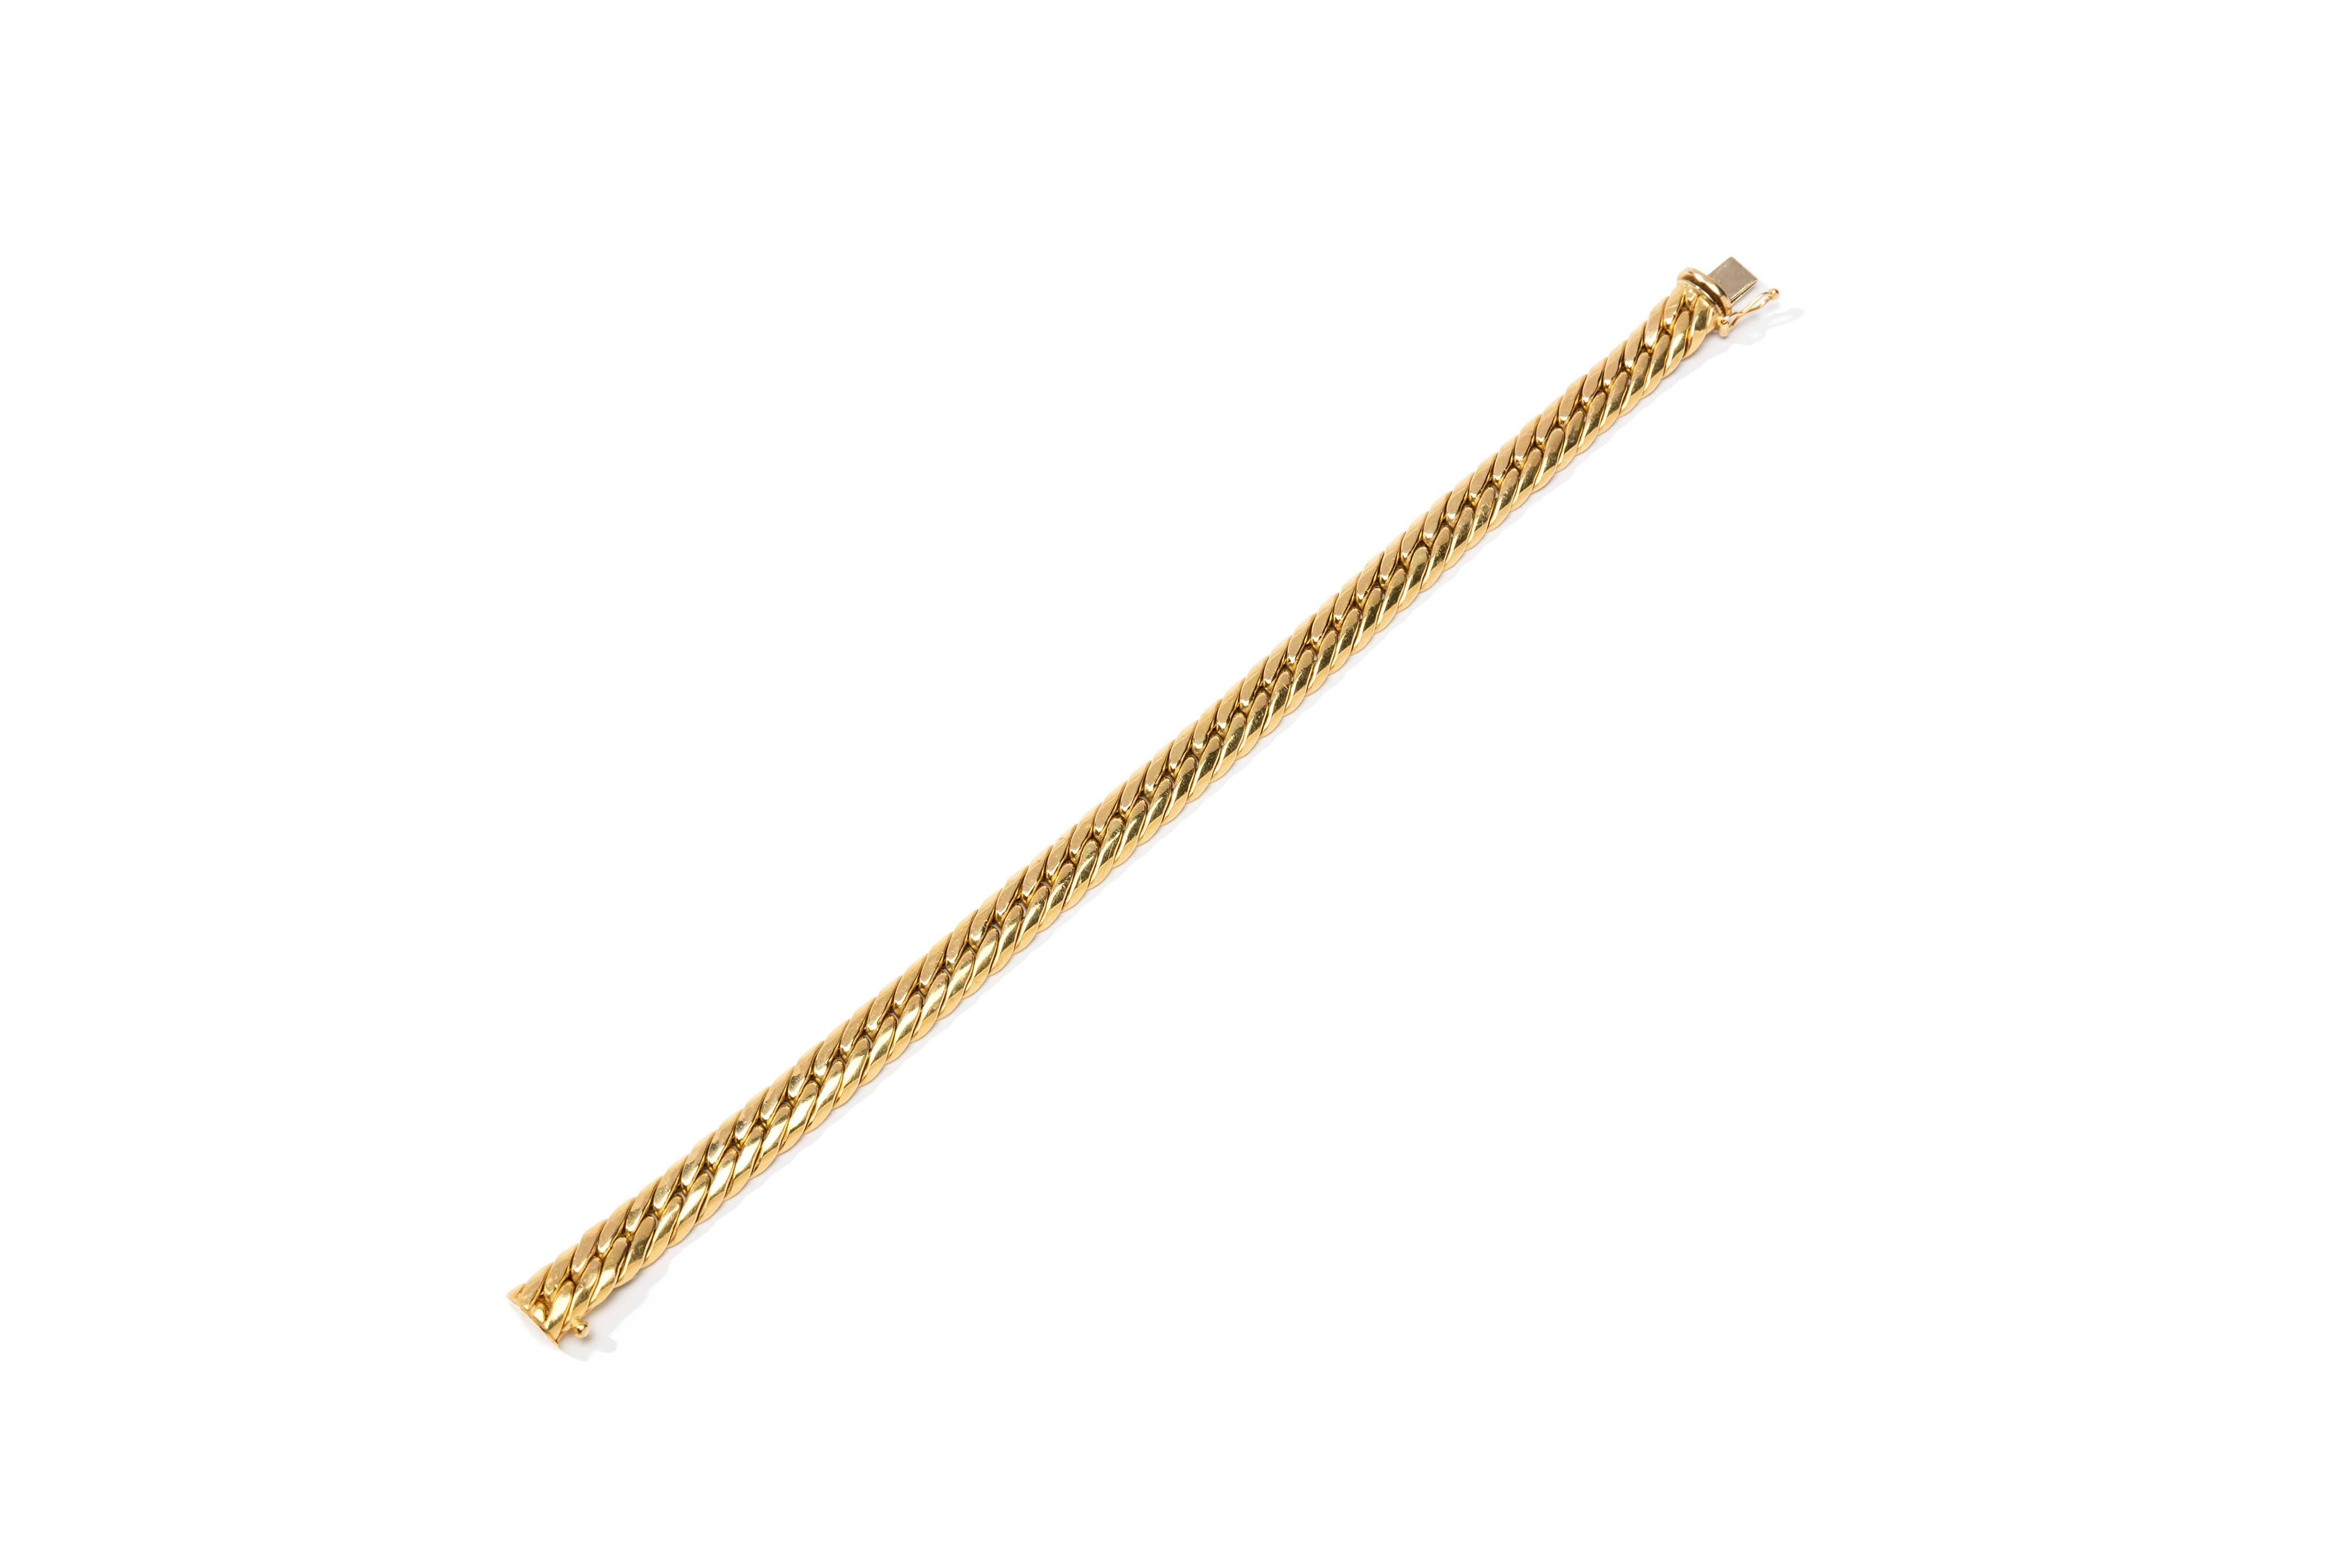 Set in 14 carat yellow gold. Hallmarked on the clasp: 585 GGS. 
Total weight: 13,5 grams. Length: 8.07 in ( 20,5 cm ), Width: 0.35 in ( 0,9 cm )
